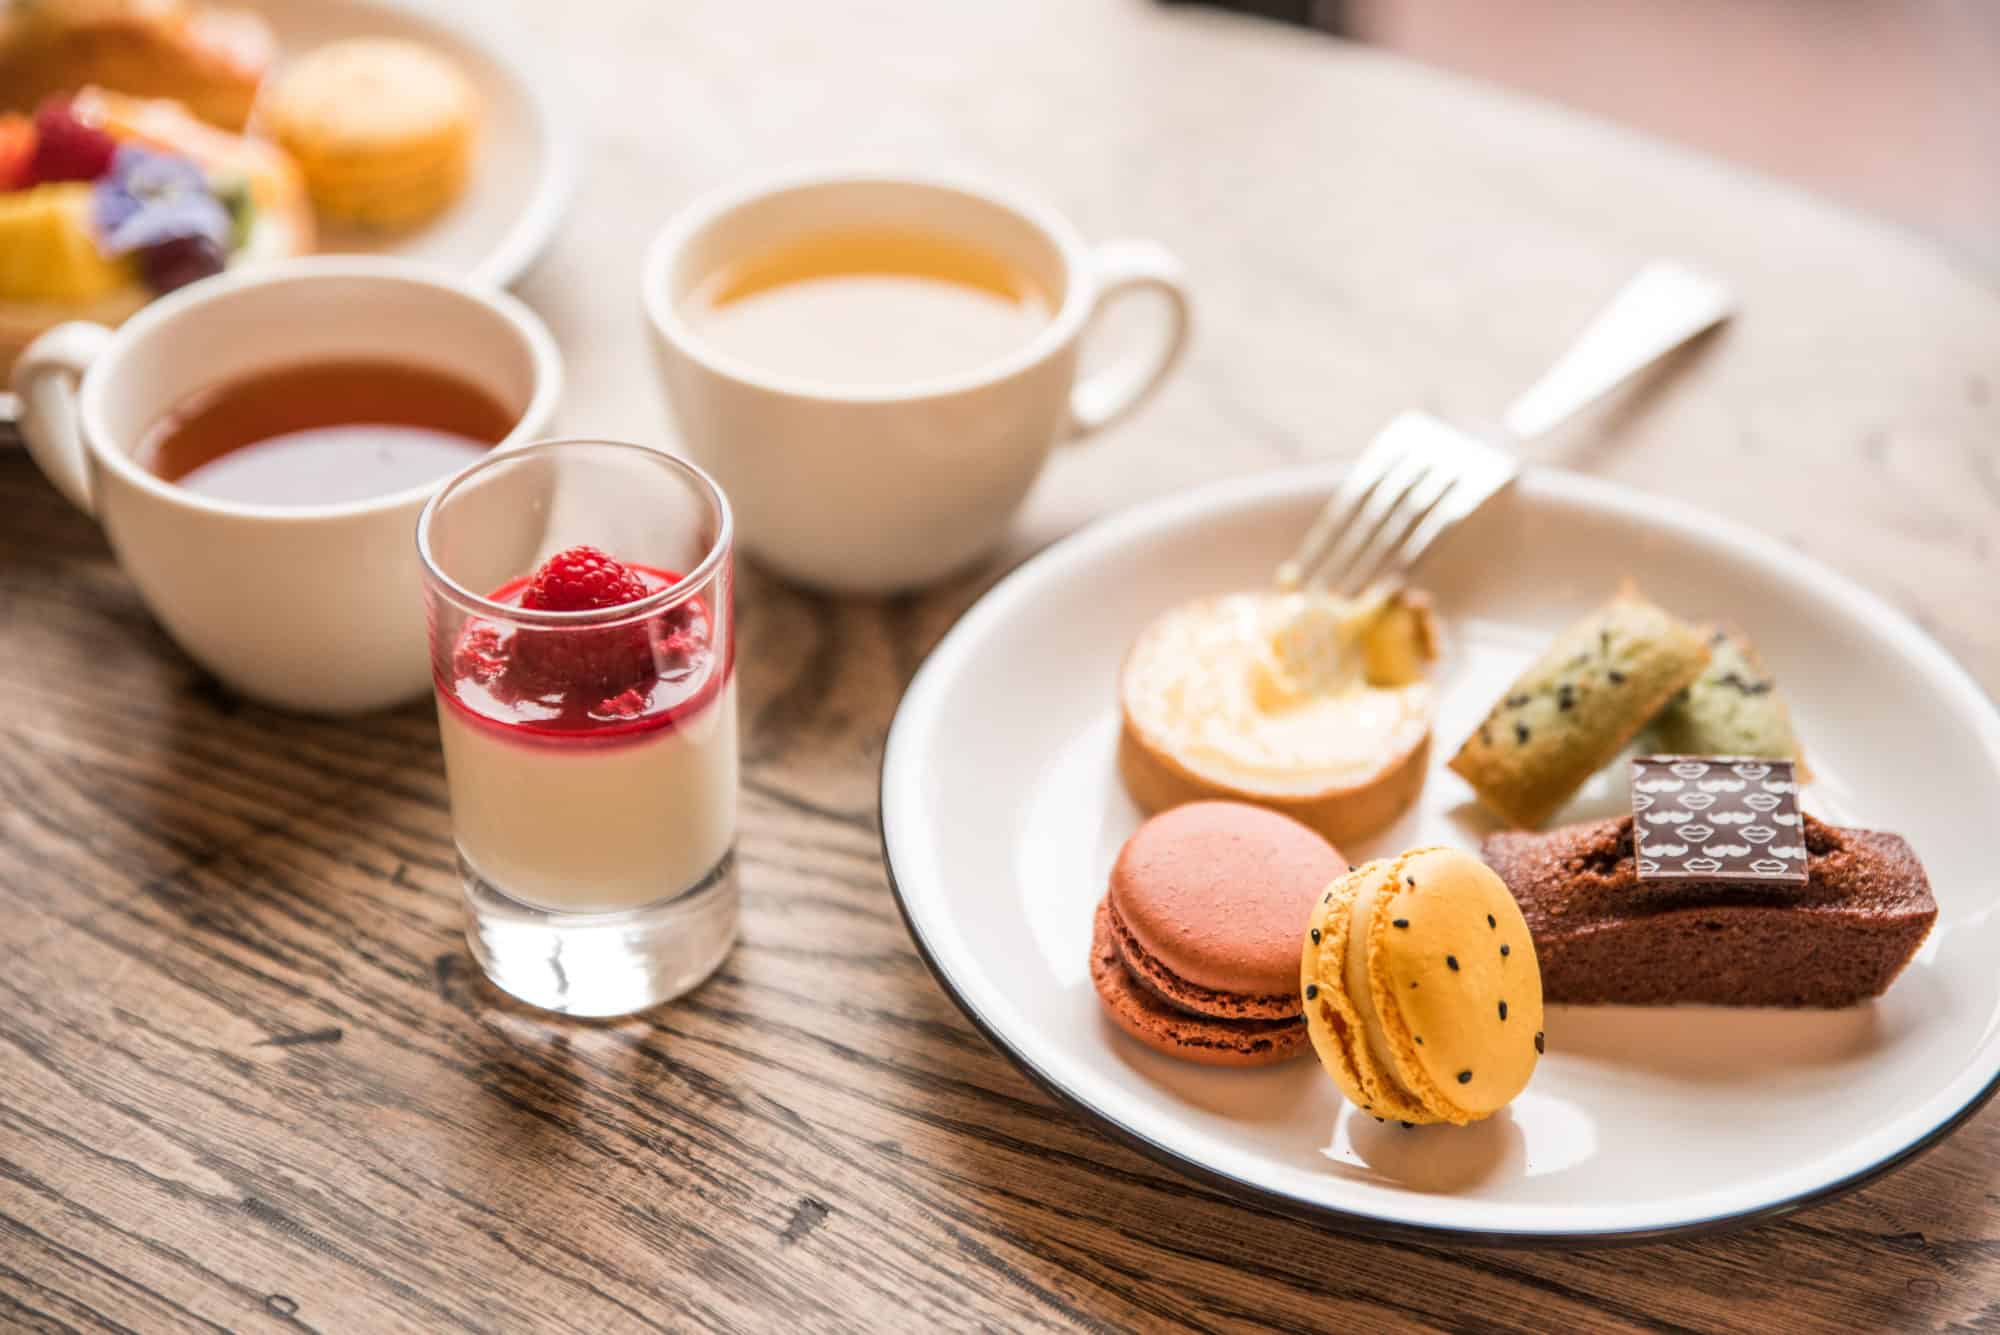 Macarons, a mini lemon tart, and financiers sit next to panna cotta and piping hot cups of tea.